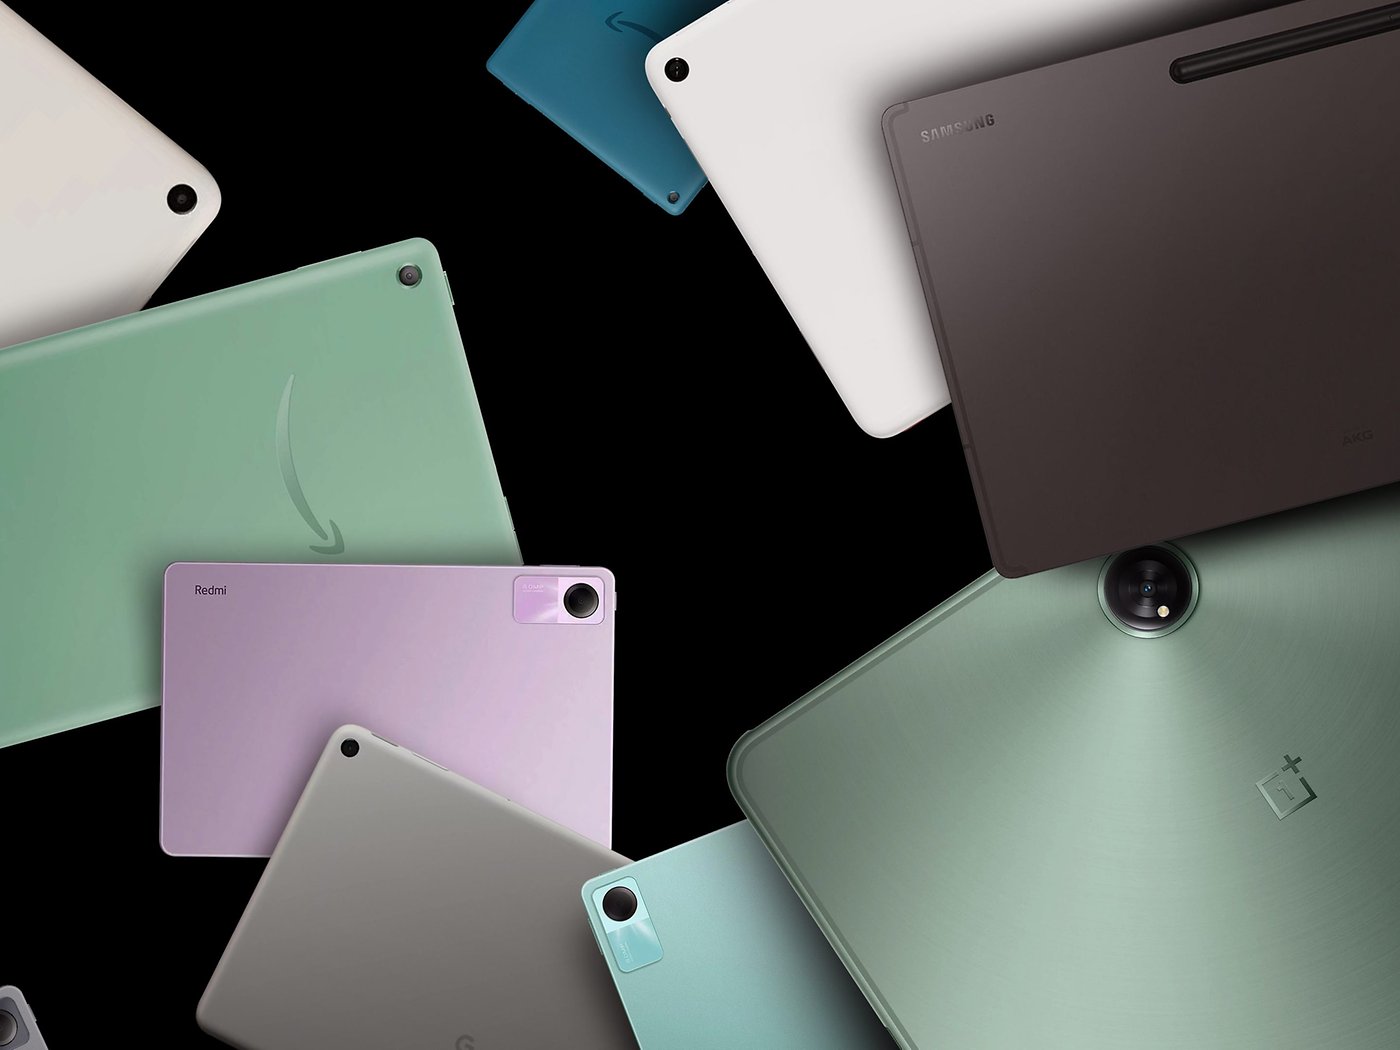 Samsung Galaxy Tab S: Premium Android tablet line has Apple's